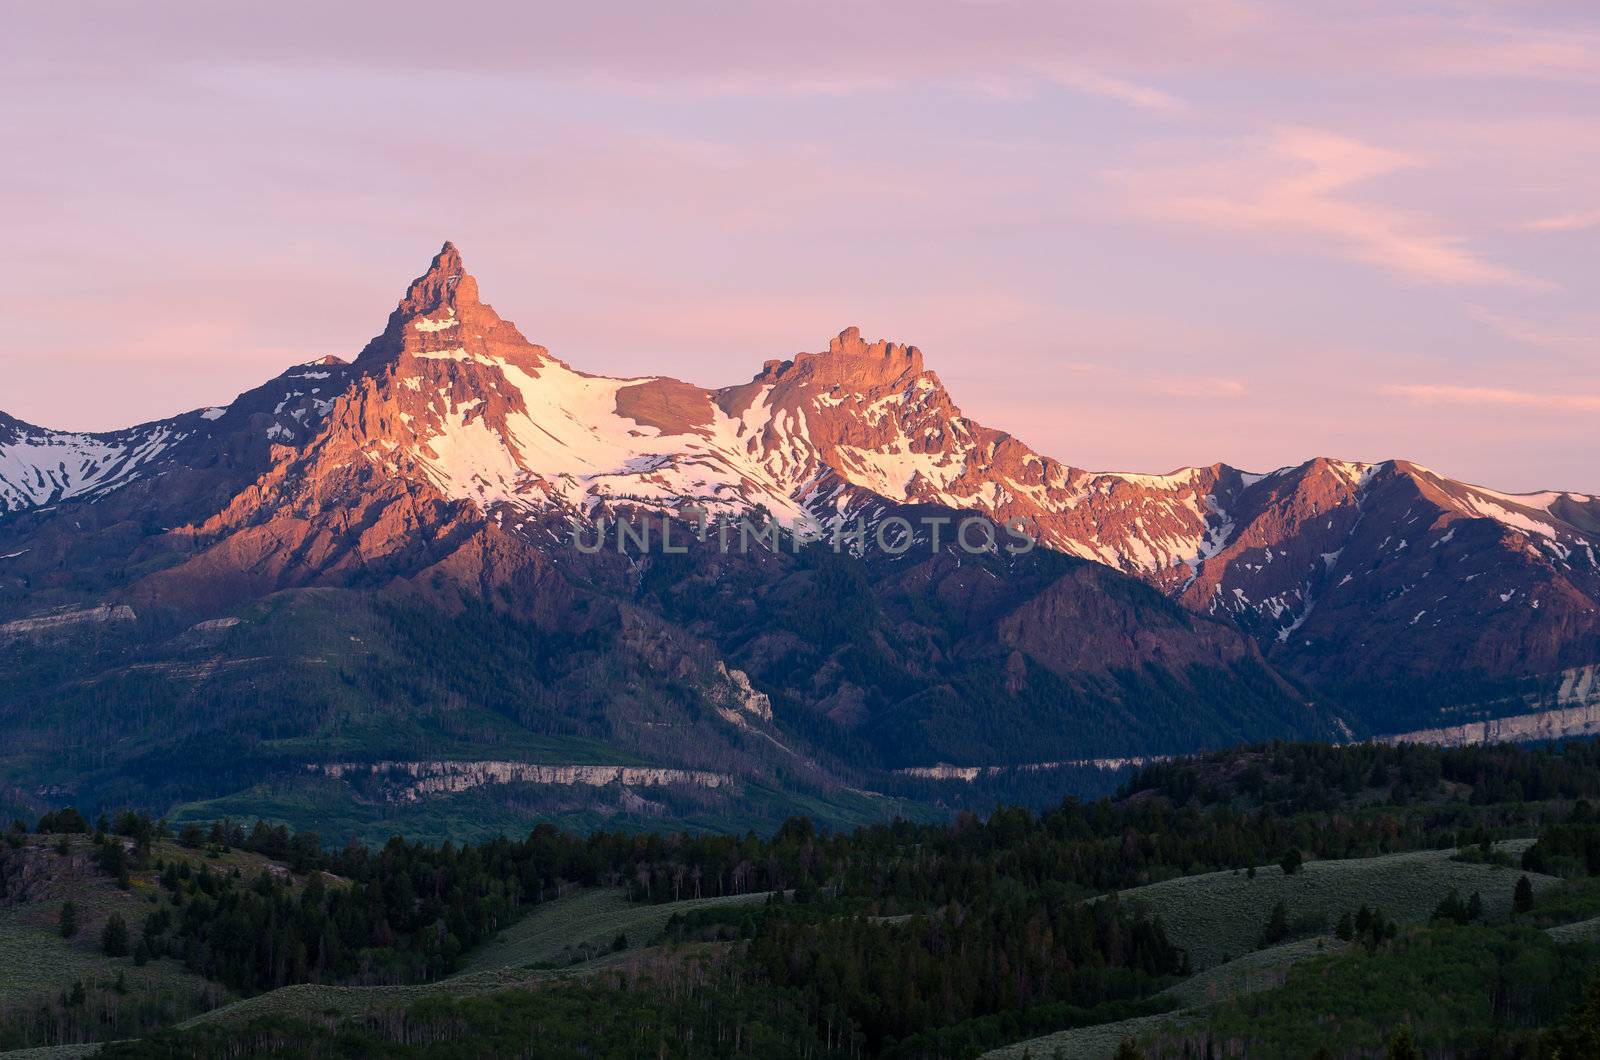 Pilot Peak (left) and Index Peak (center) at sunrise in summer, Shoshone National Forest, Park County, Wyoming, USA by CharlesBolin